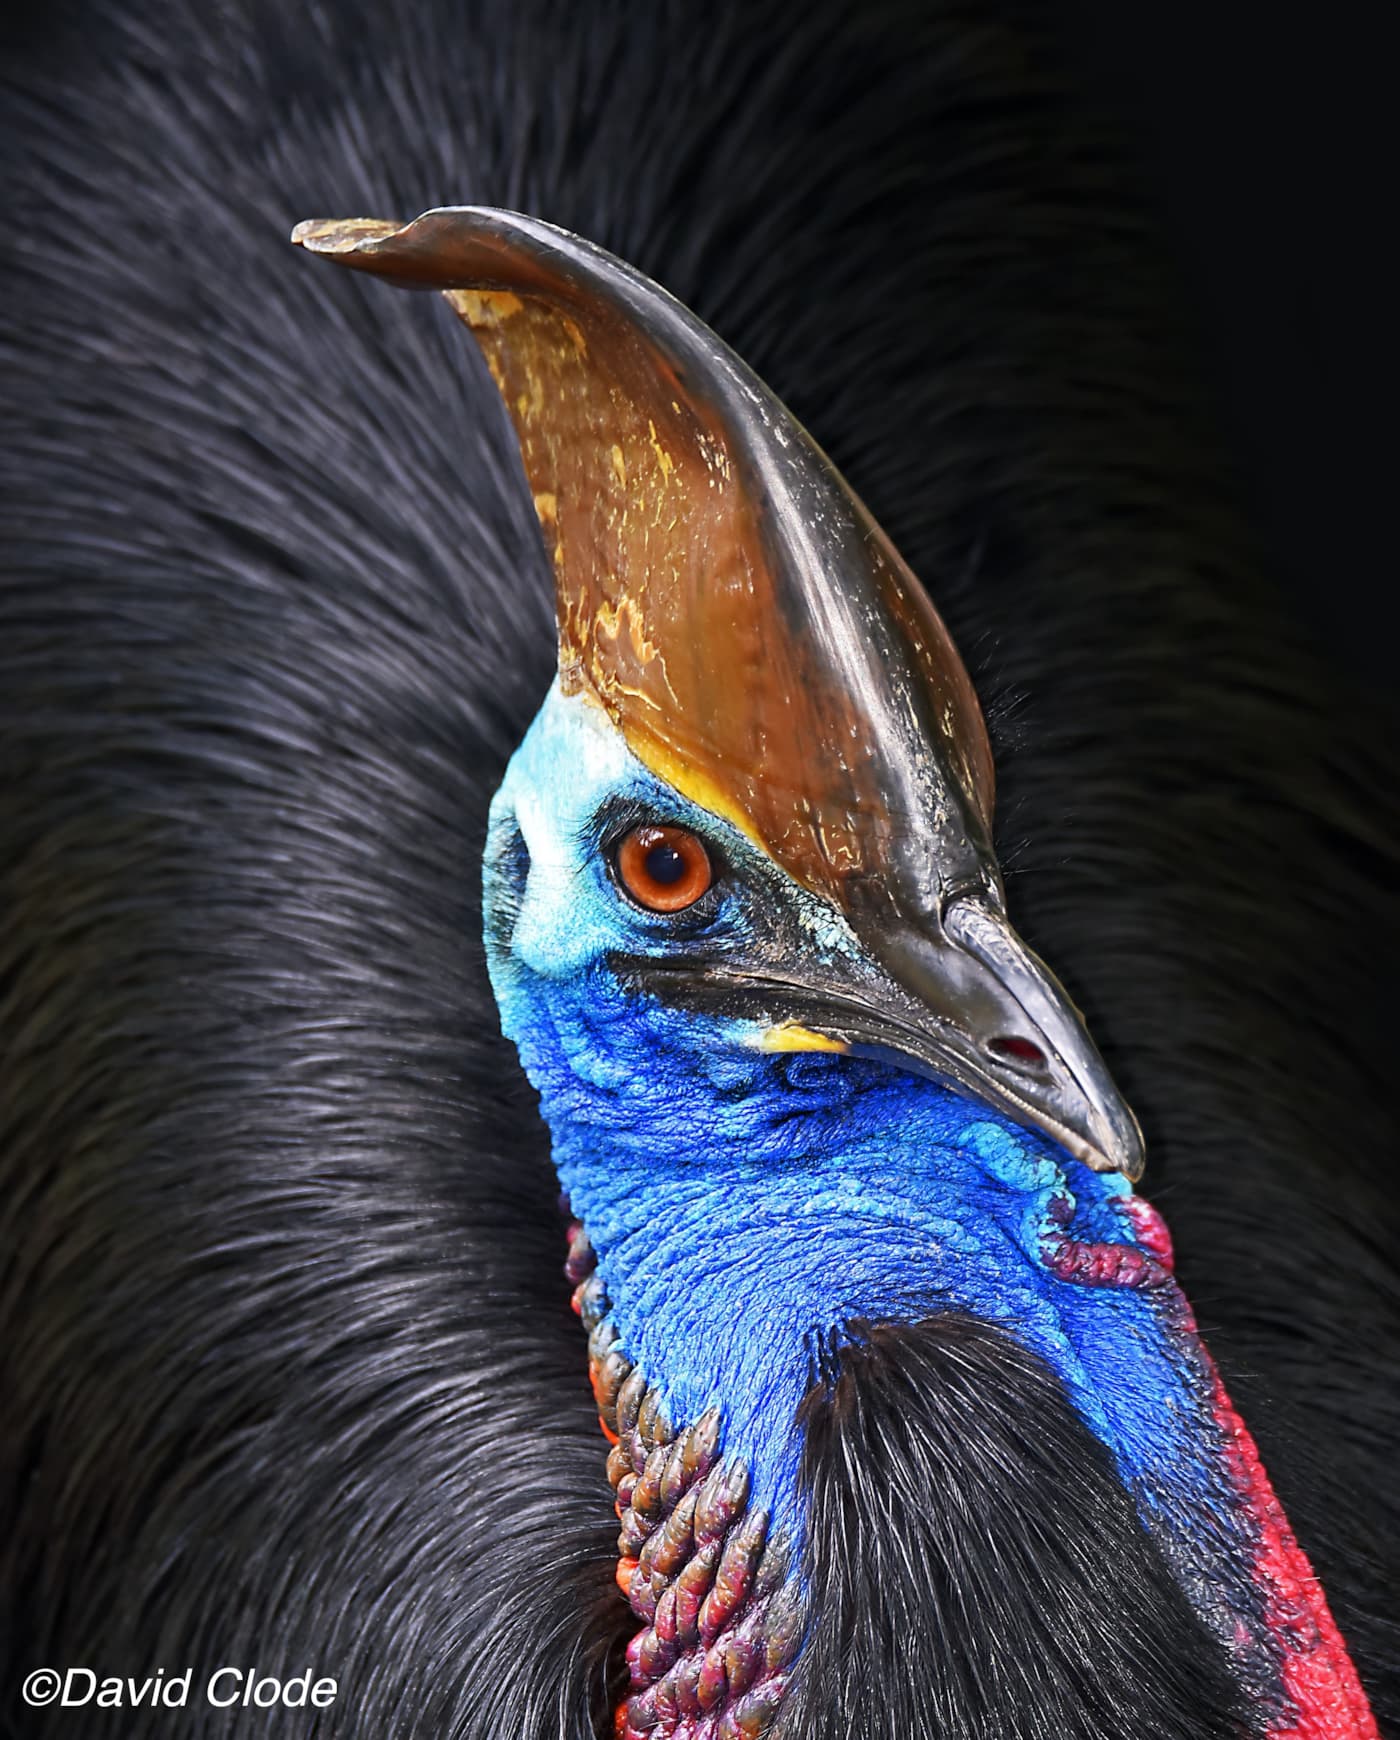 Cassowary photo of head and body photo from above, bird is looking slightly up towards camera